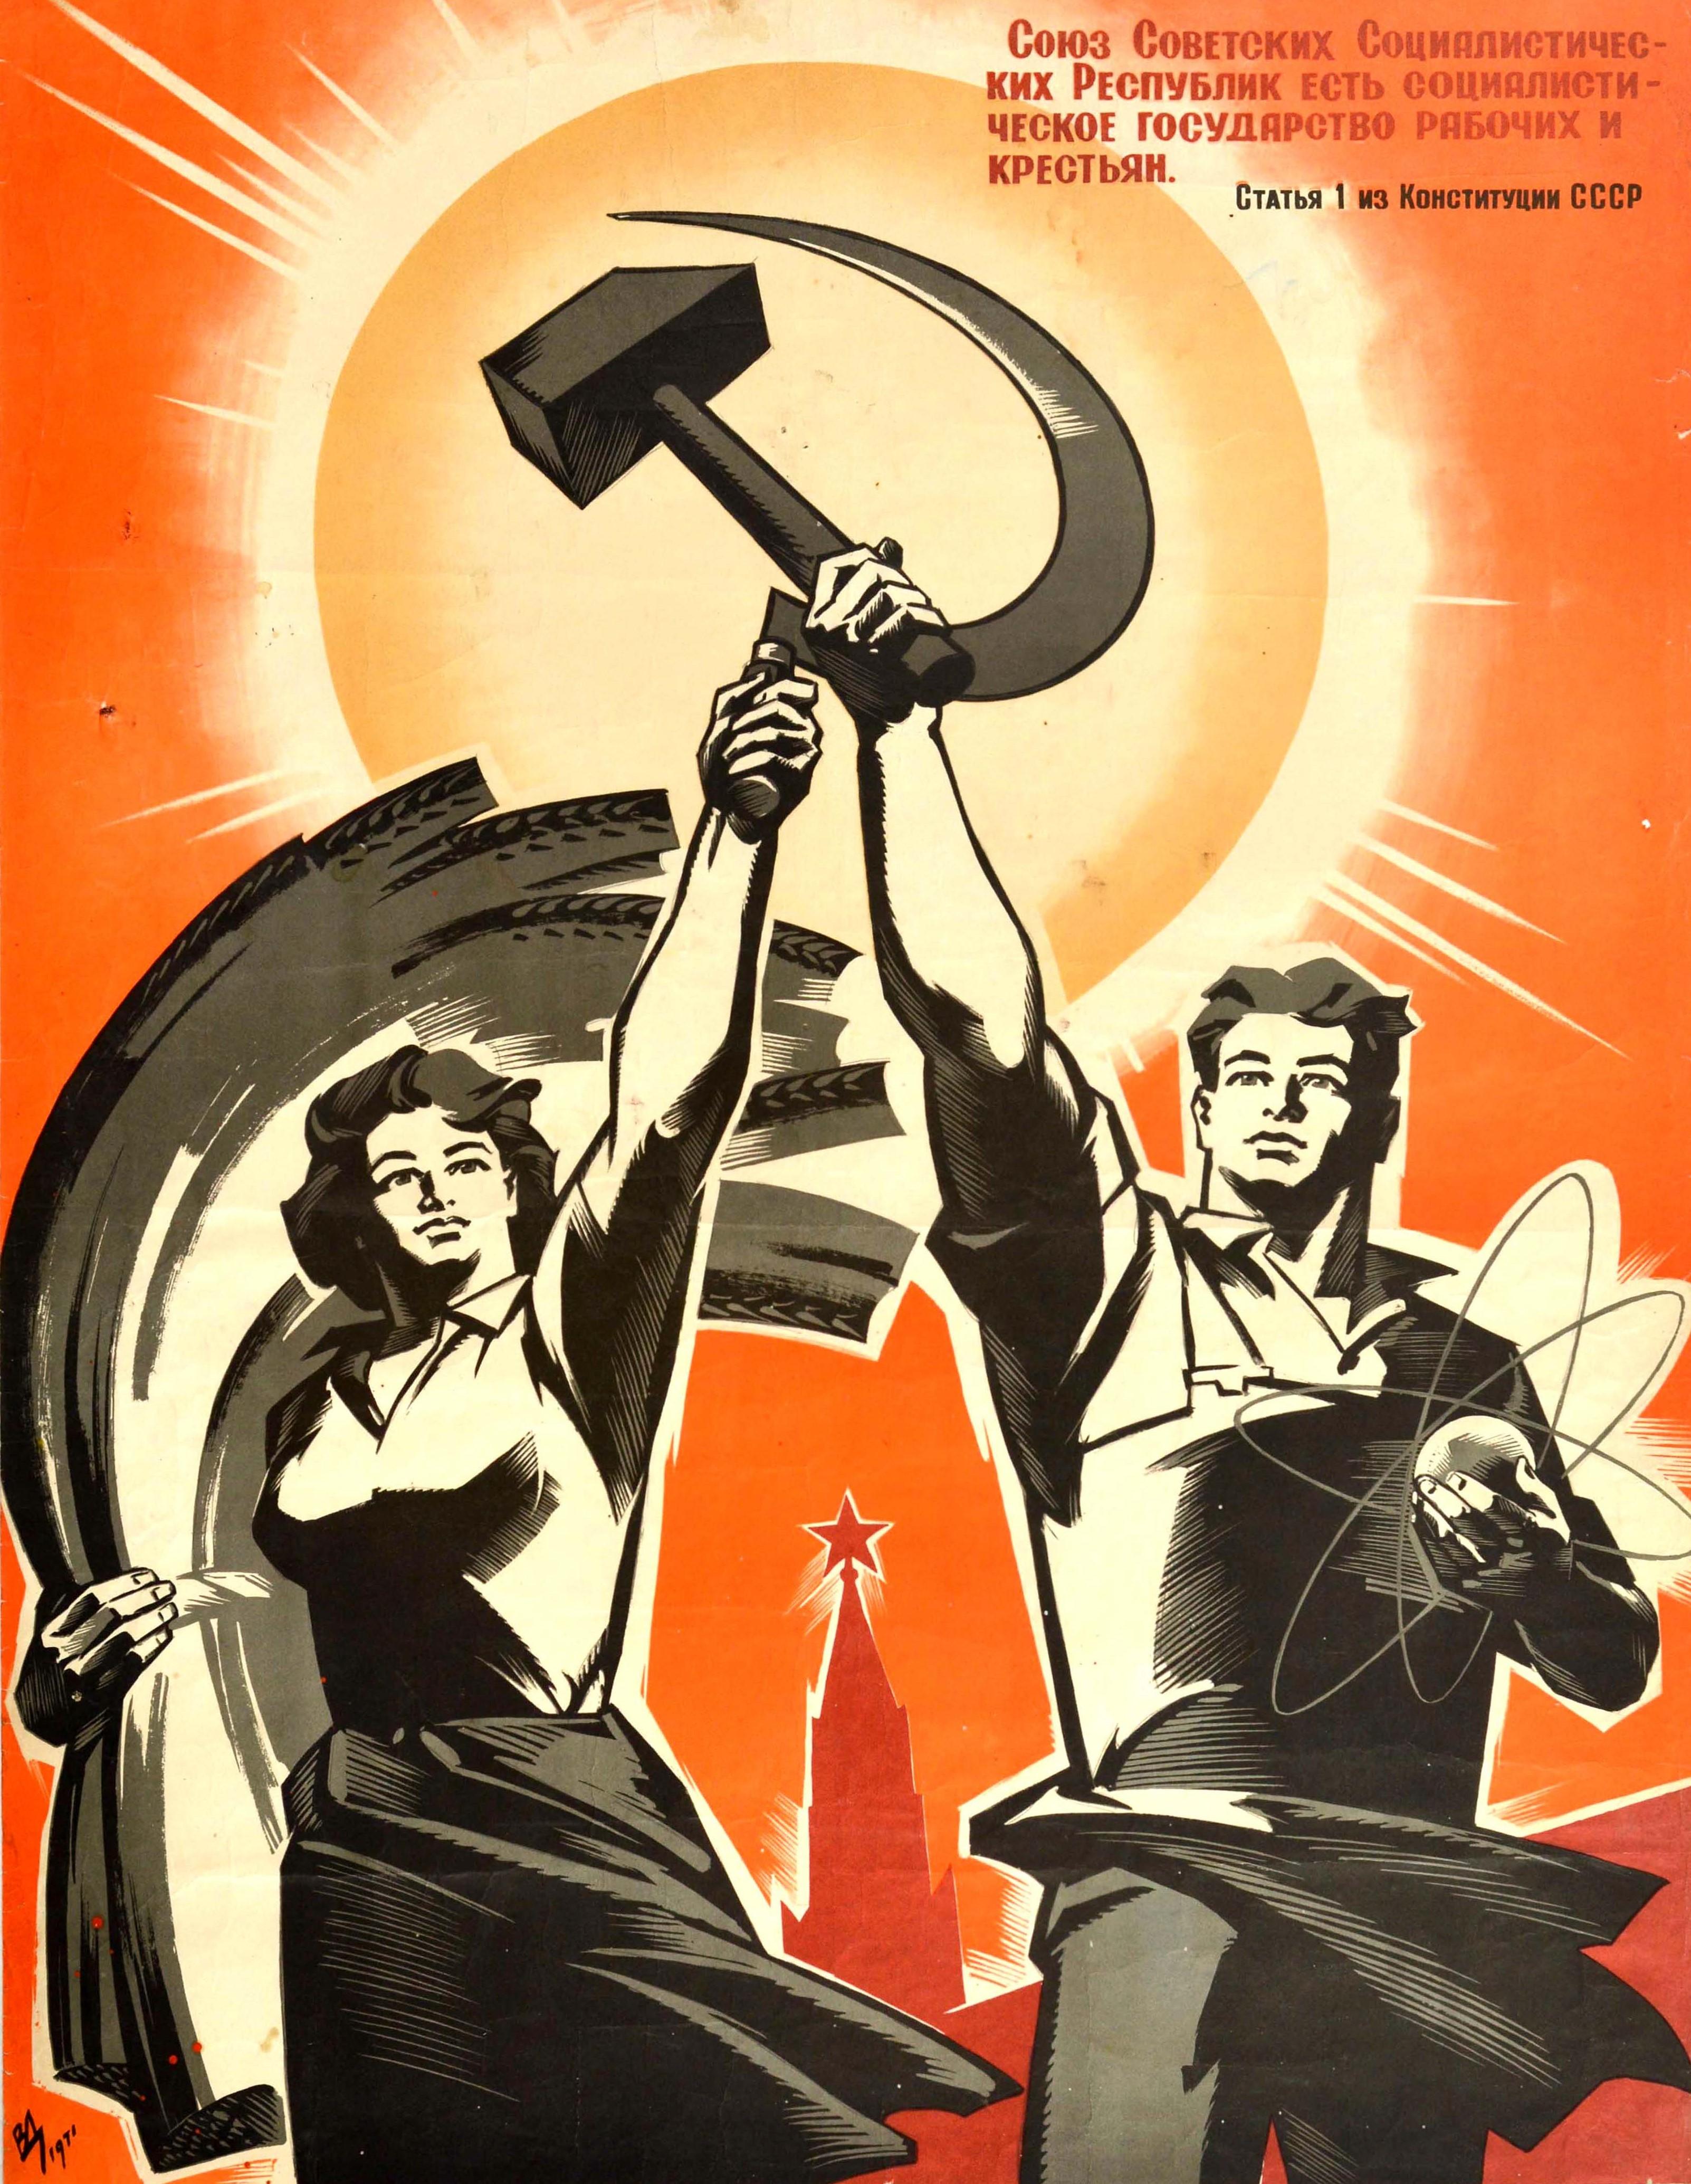 Original vintage Soviet propaganda poster - The Concern of Our Party, the Purpose of Our Life is the Well-being of Our People, the Strength of Our Fatherland! - featuring a dynamic design based on the sculpture of the Worker and Kolkhoz Woman of a